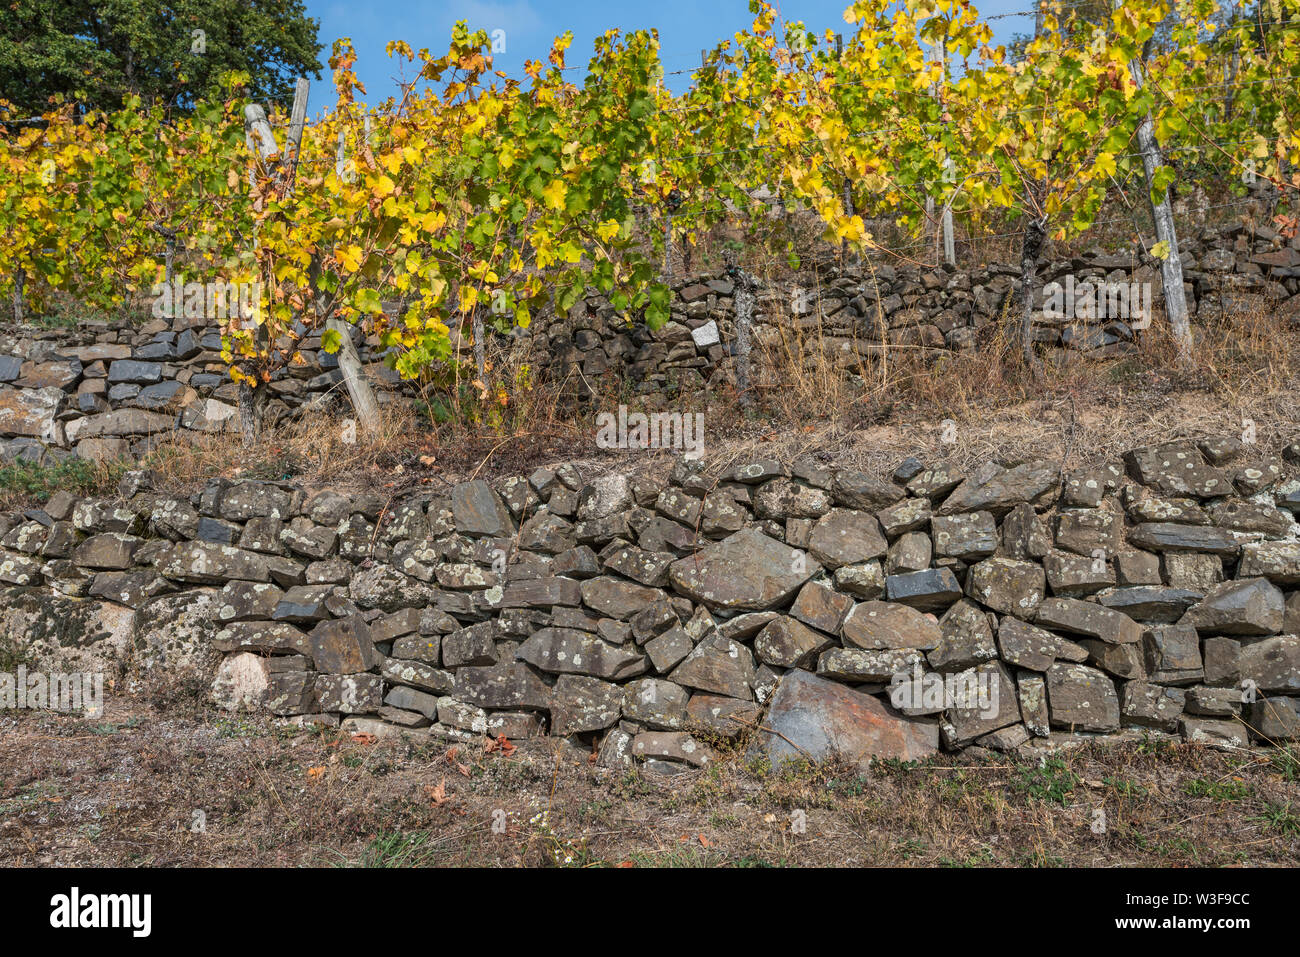 dry stone wall in terraced vineyards, Andlau, Alsace, France Stock Photo